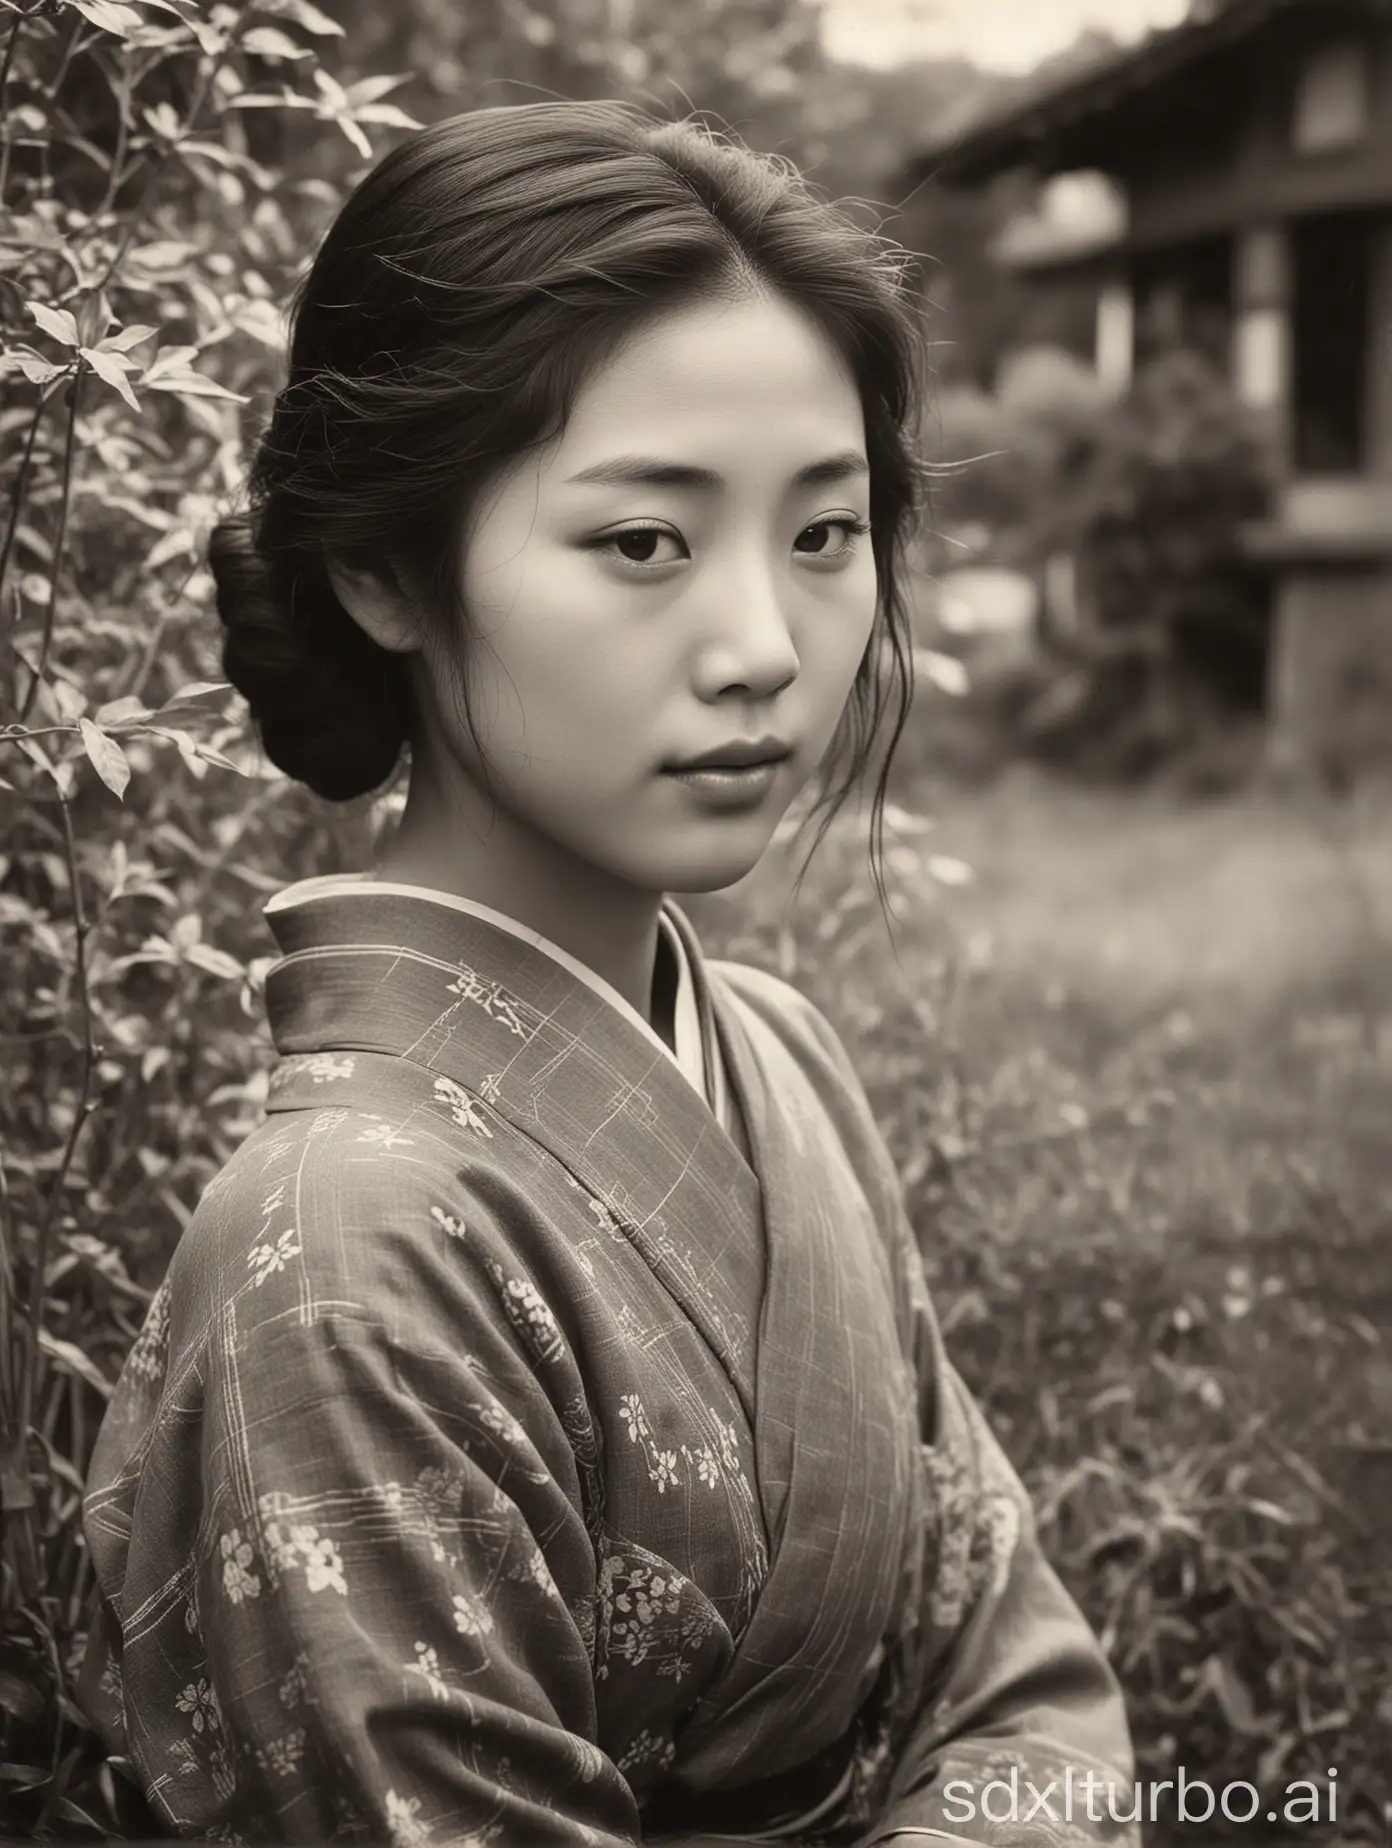 A vintage photograph from 1920, capturing the essence of a beautiful young Japanese woman living in a rural area, with a serene expression on her face, as if she's pondering life's mysteries. The image exudes a sense of nostalgia and tranquility, transporting viewers to an era long past., black and white, photo